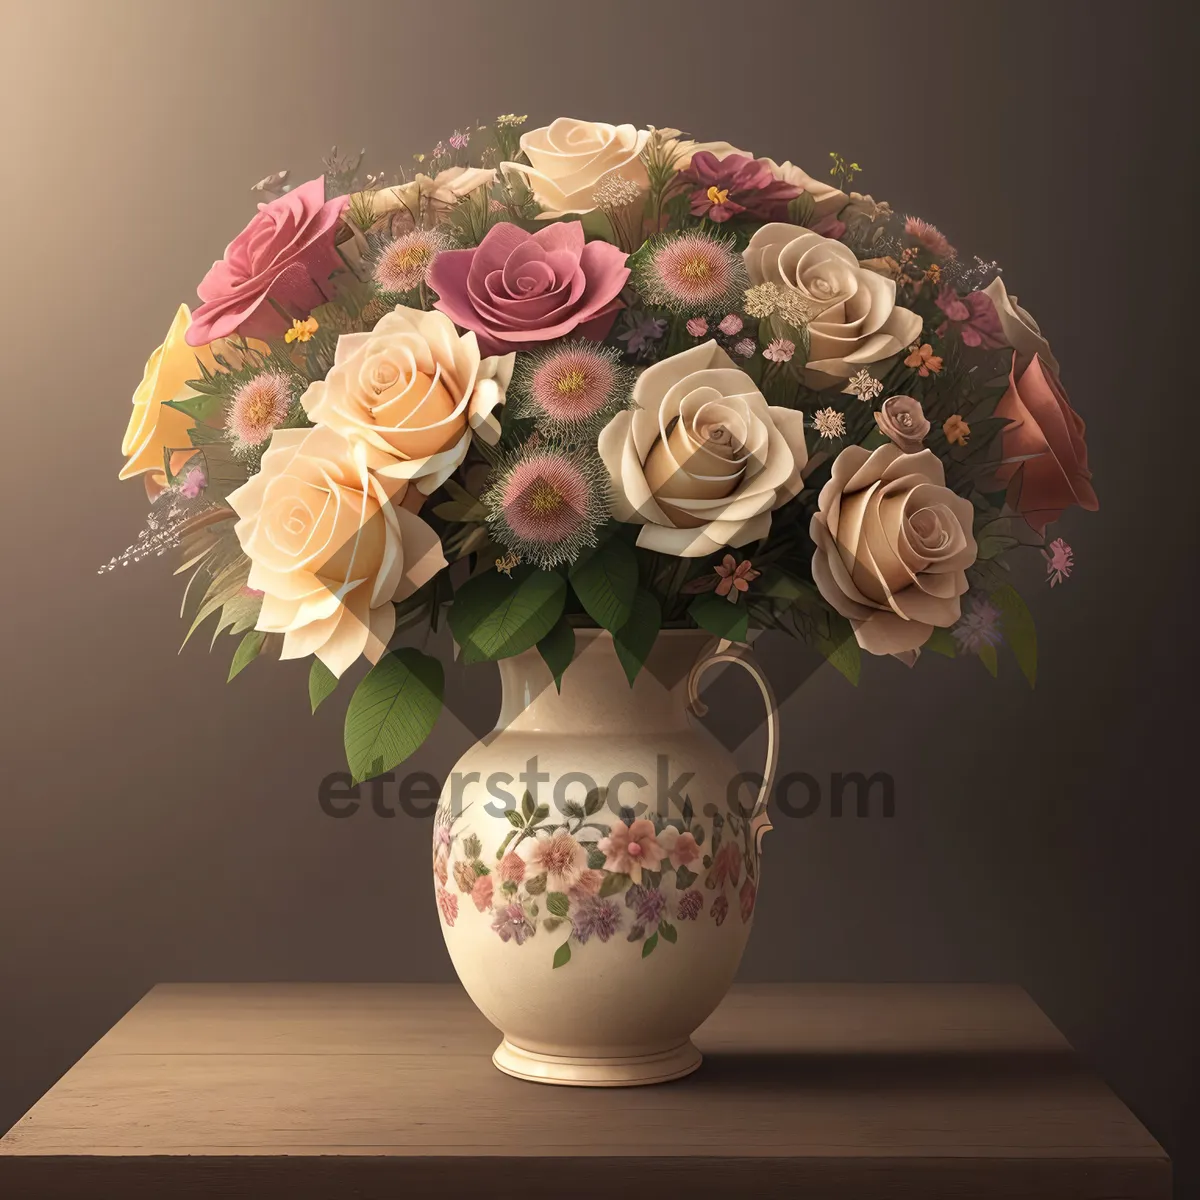 Picture of Pink floral vase with stunning rose bouquet